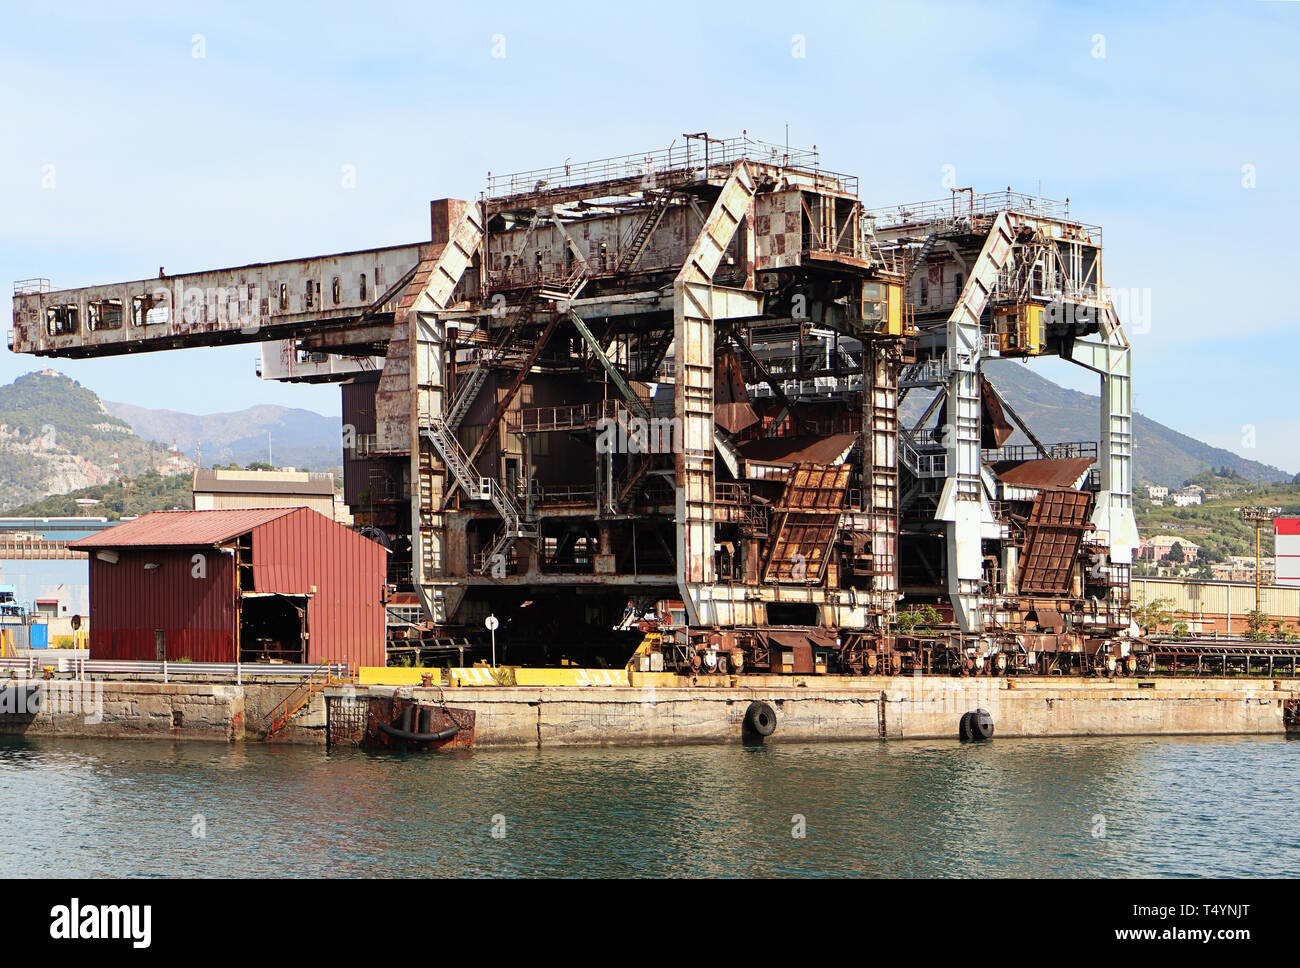 Genoa harbor, Italy - Rusty industrial structures at the container port terminal Stock Photo